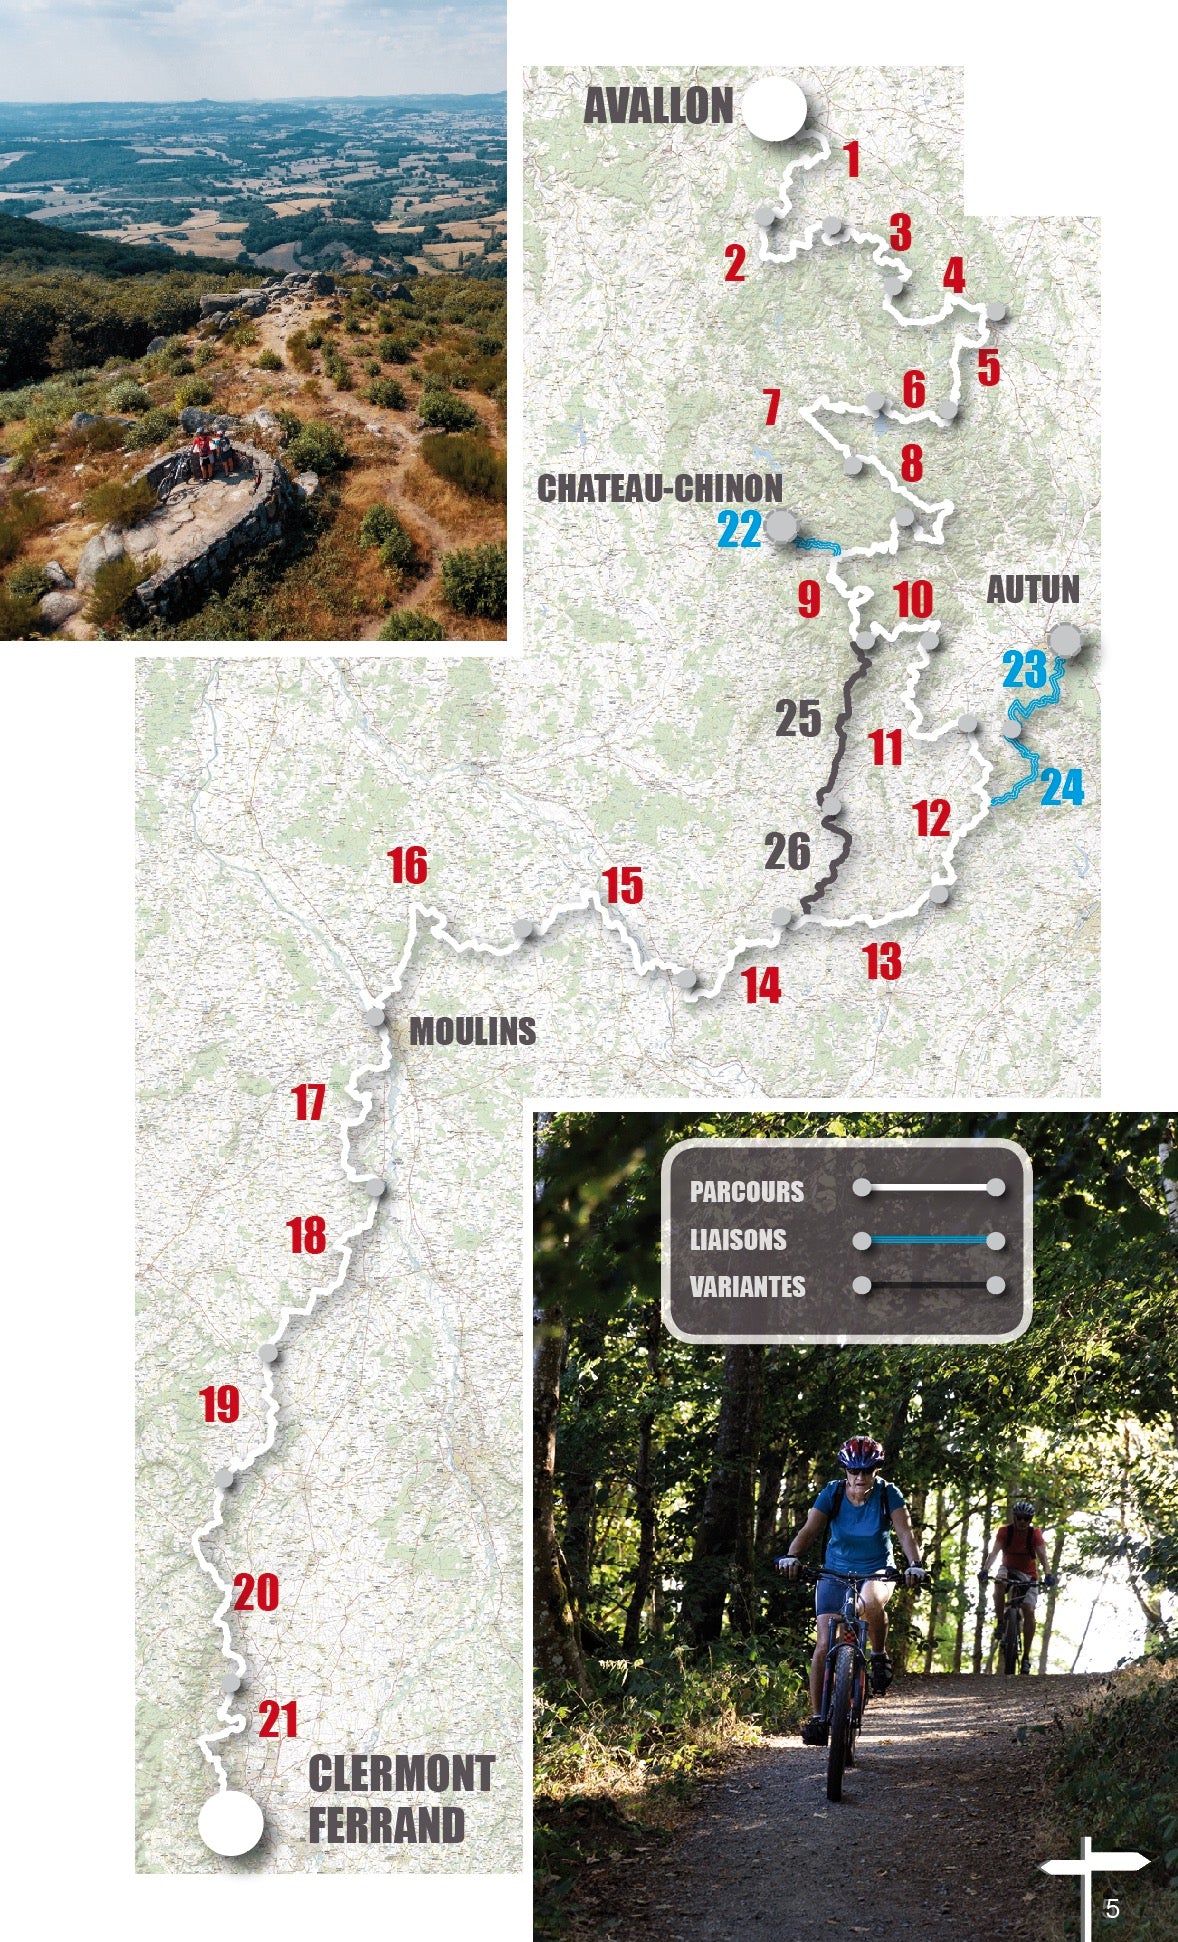 VTOPO MTB Roaming Great Crossing of the Massif Central - Volume 1 - 2nd edition